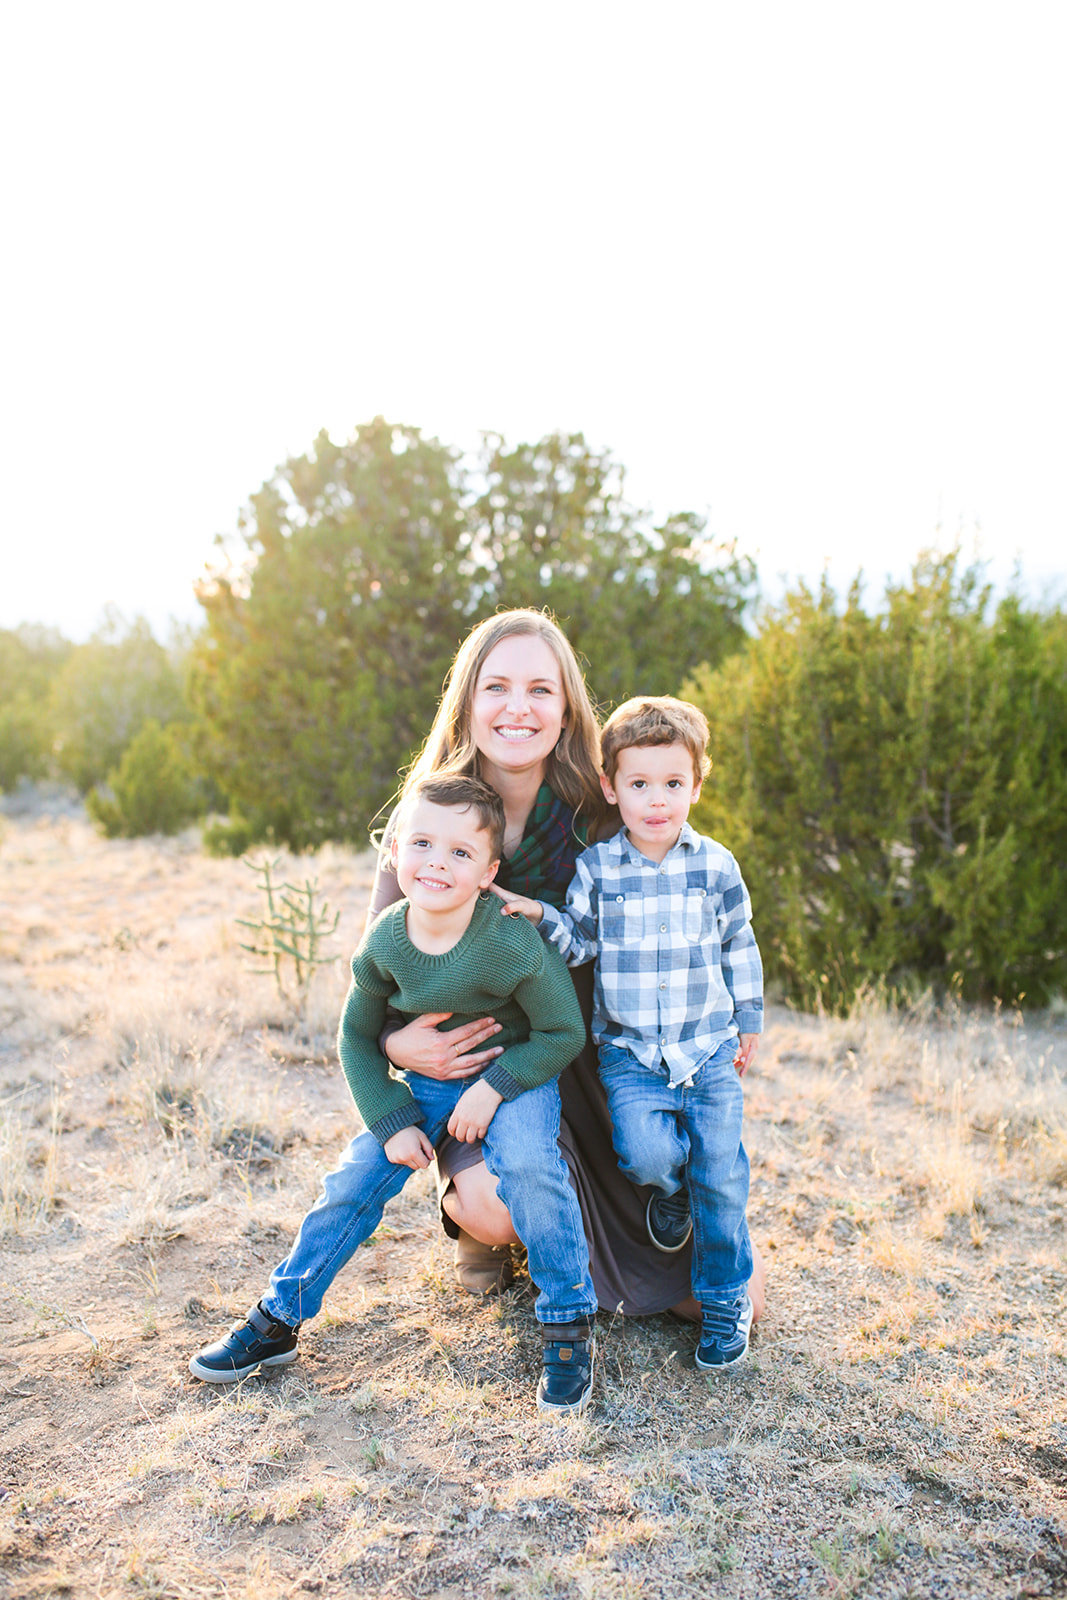 Albuquerque Family Photography_Foothills_www.tylerbrooke.com_Kate Kauffman_025